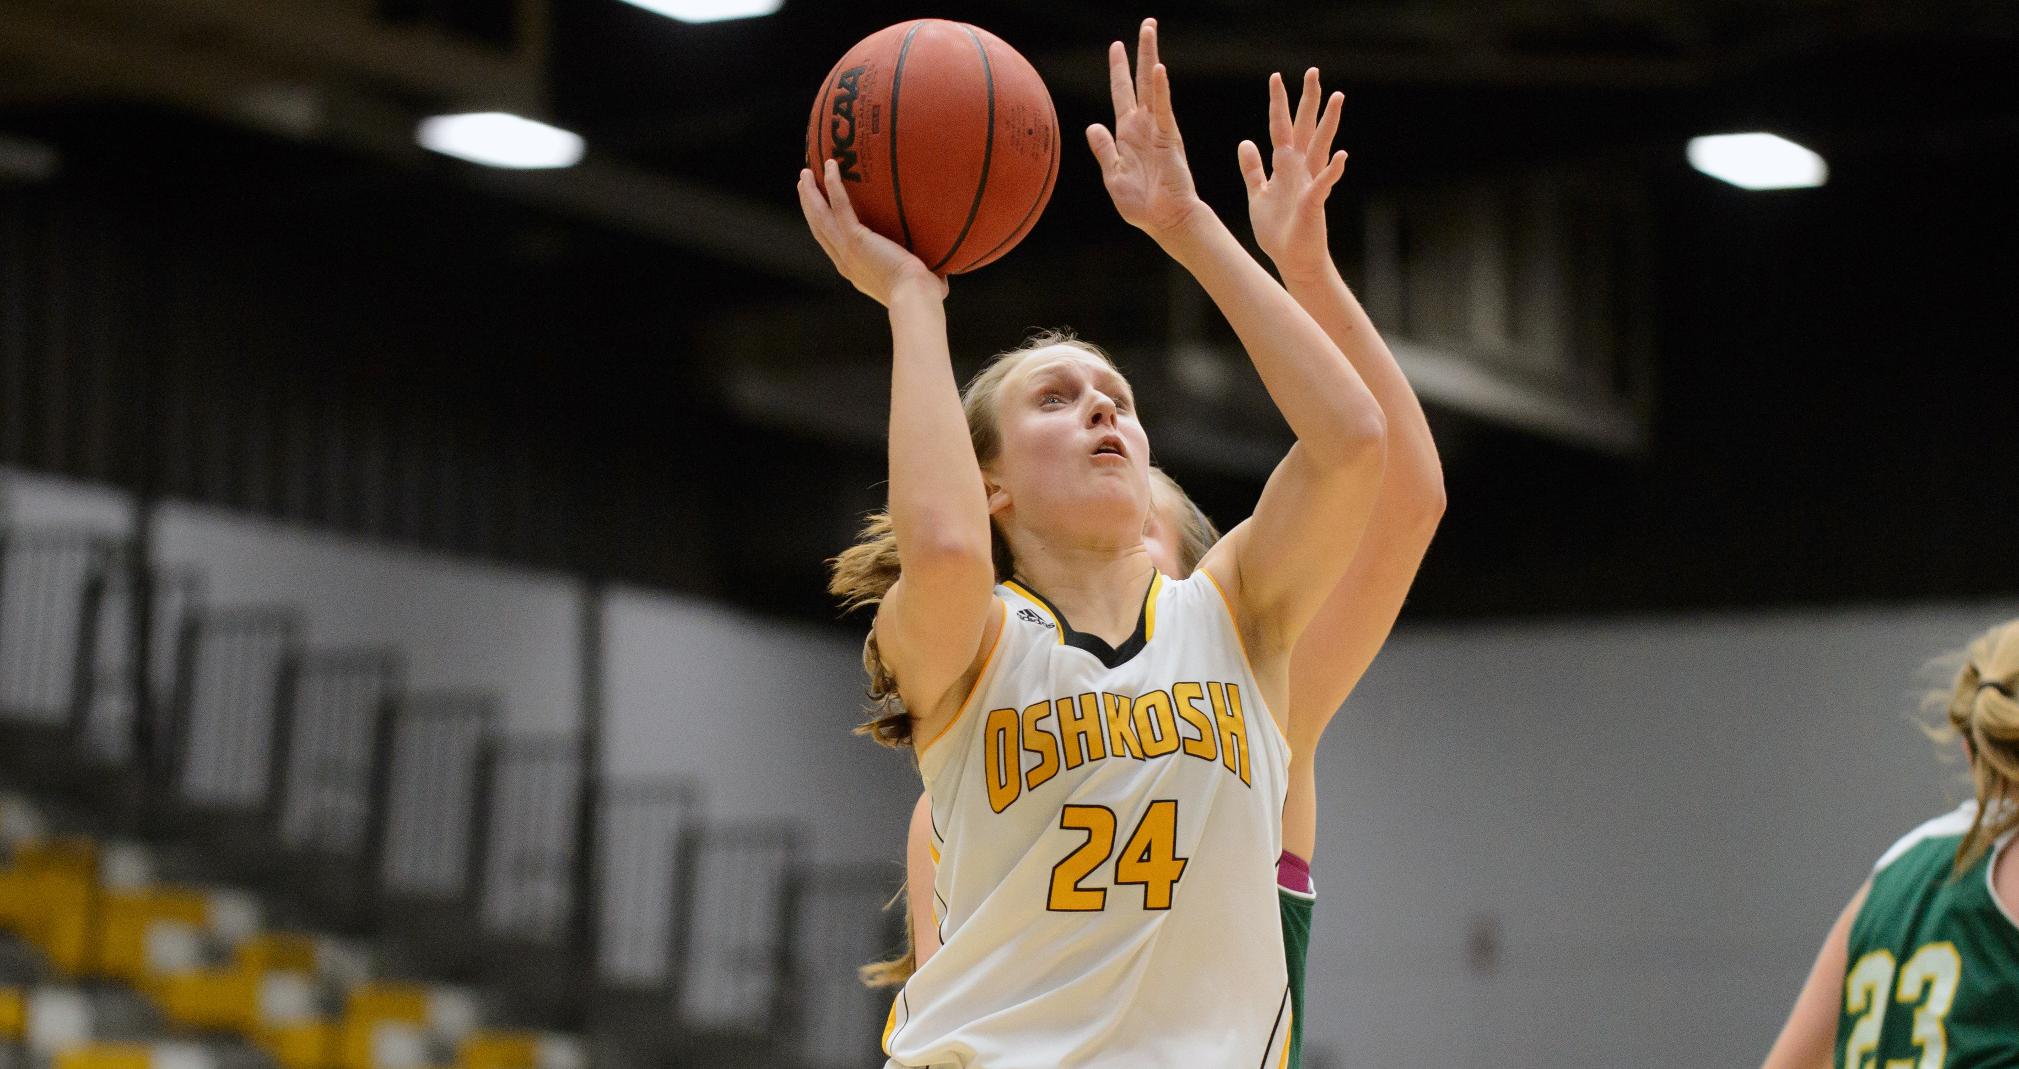 Eliza Campbell scored four points against the Knights while leading the Titans with seven rebounds and four assists.